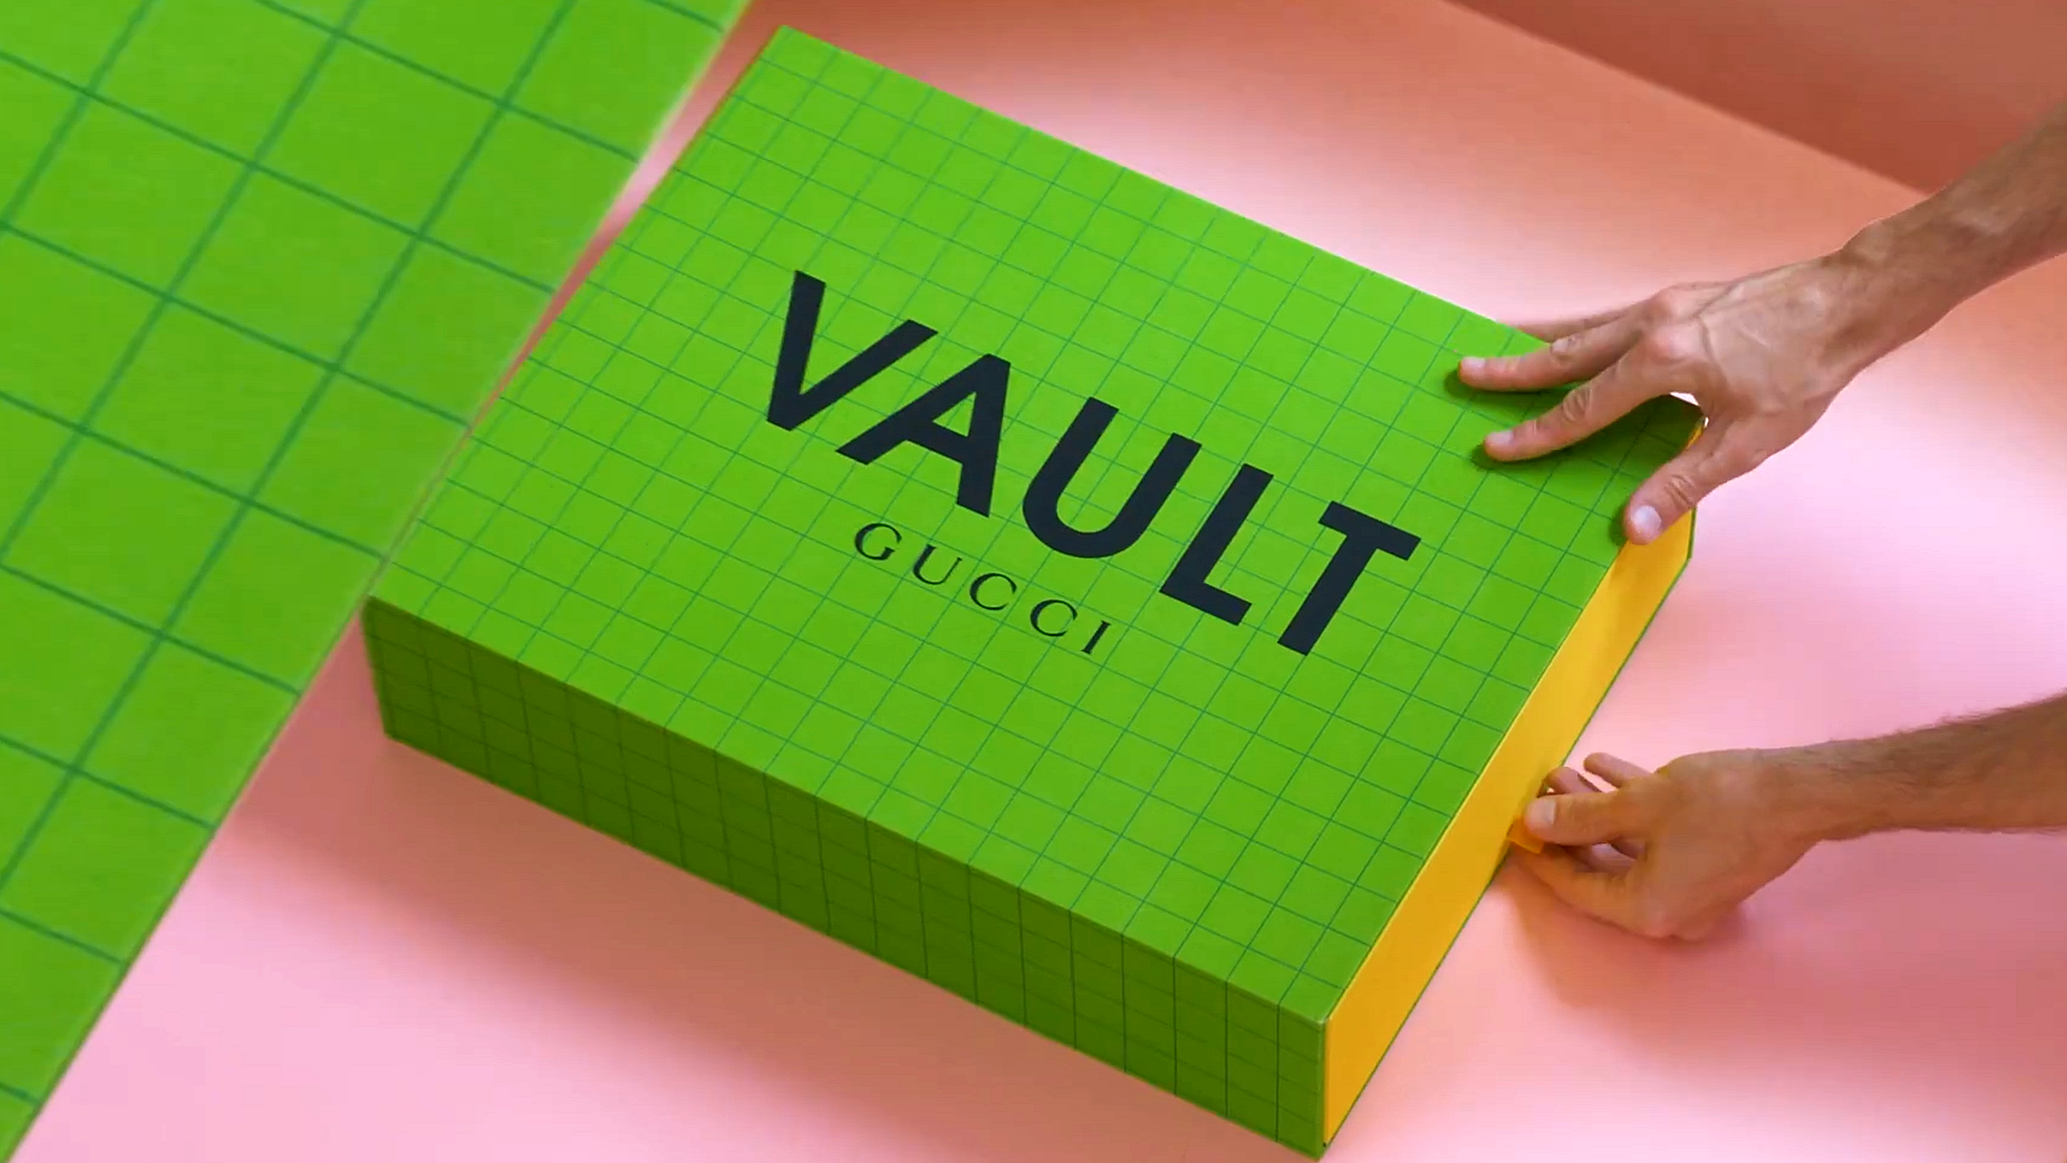 Gucci's new platform for young designers puts planet first - Thred Website